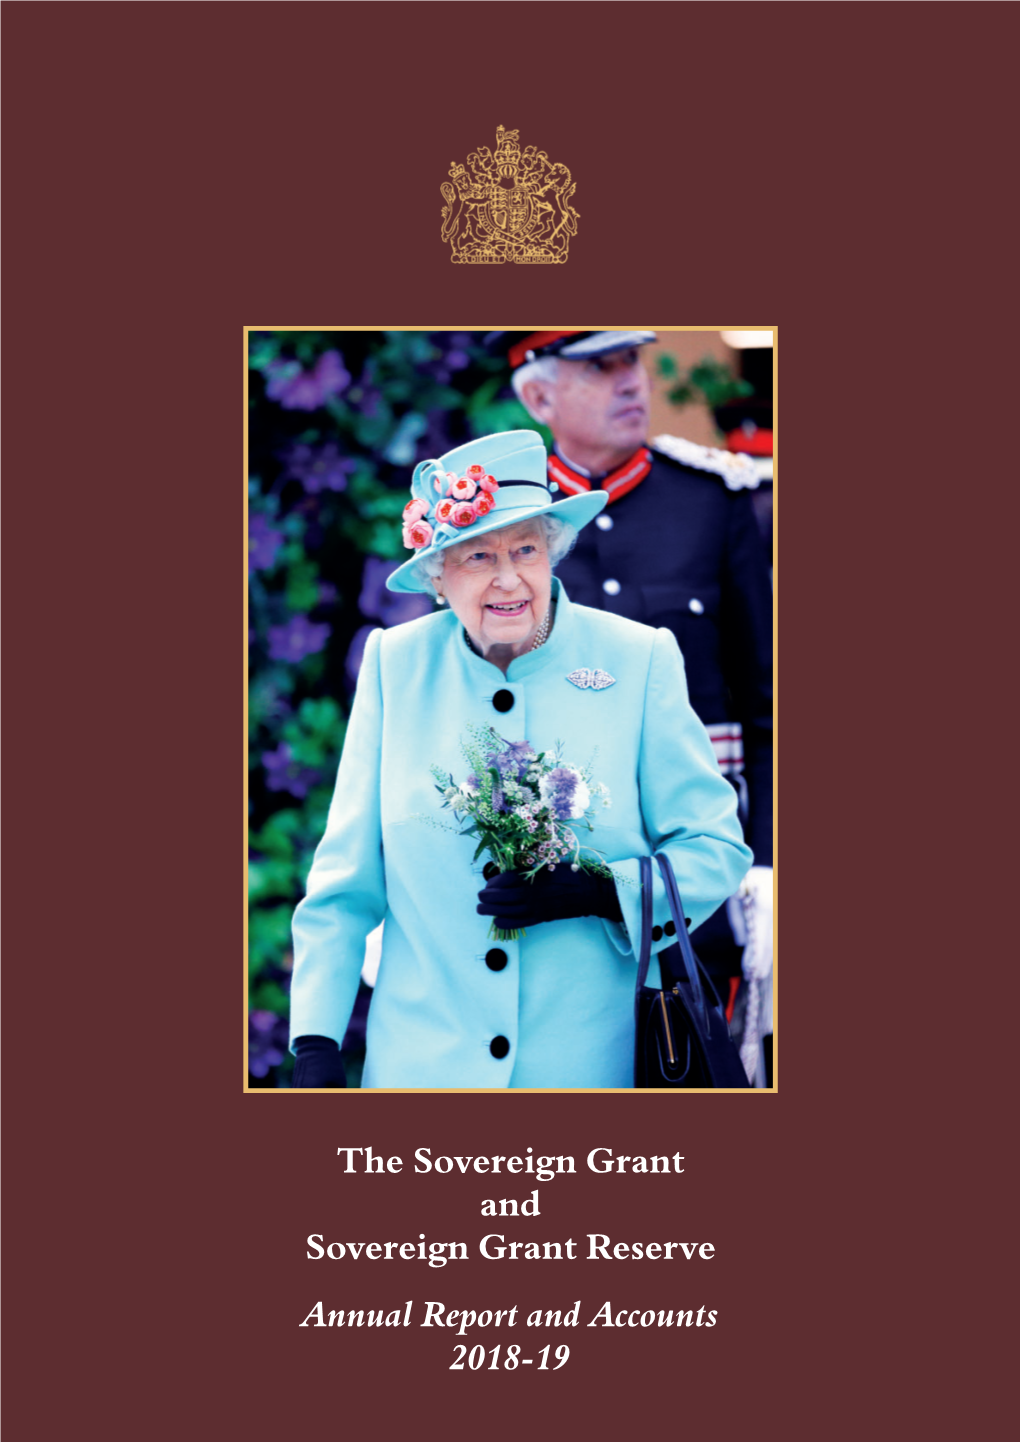 The Sovereign Grant and Sovereign Grant Reserve Annual Report and Accounts 2018-19 978-1-5286-0459-8 ISBN 1